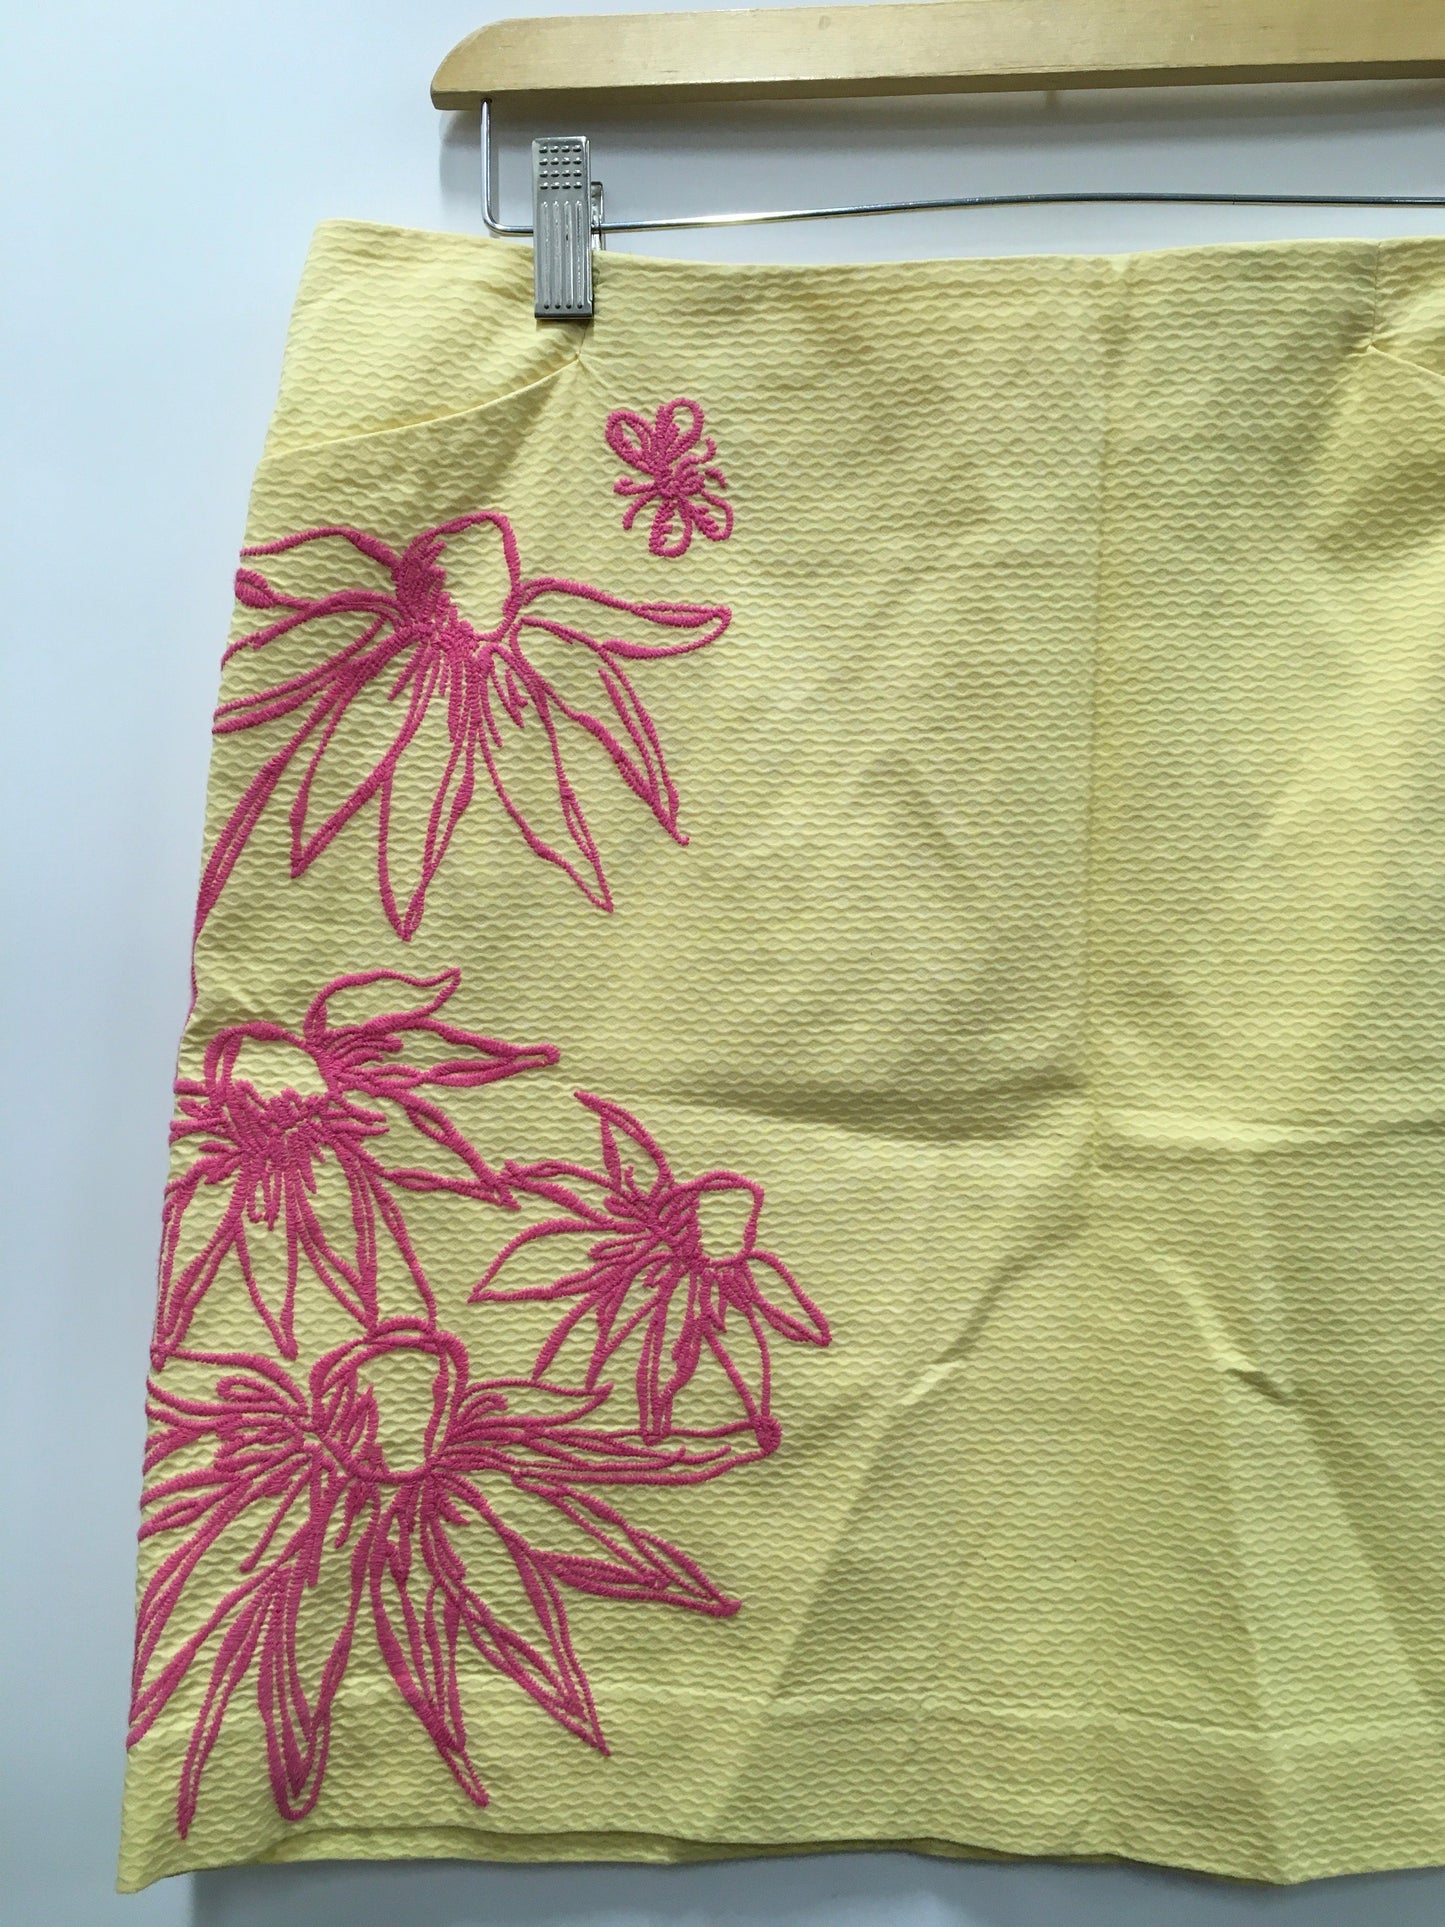 Skirt Mini & Short By Lilly Pulitzer  Size: 10